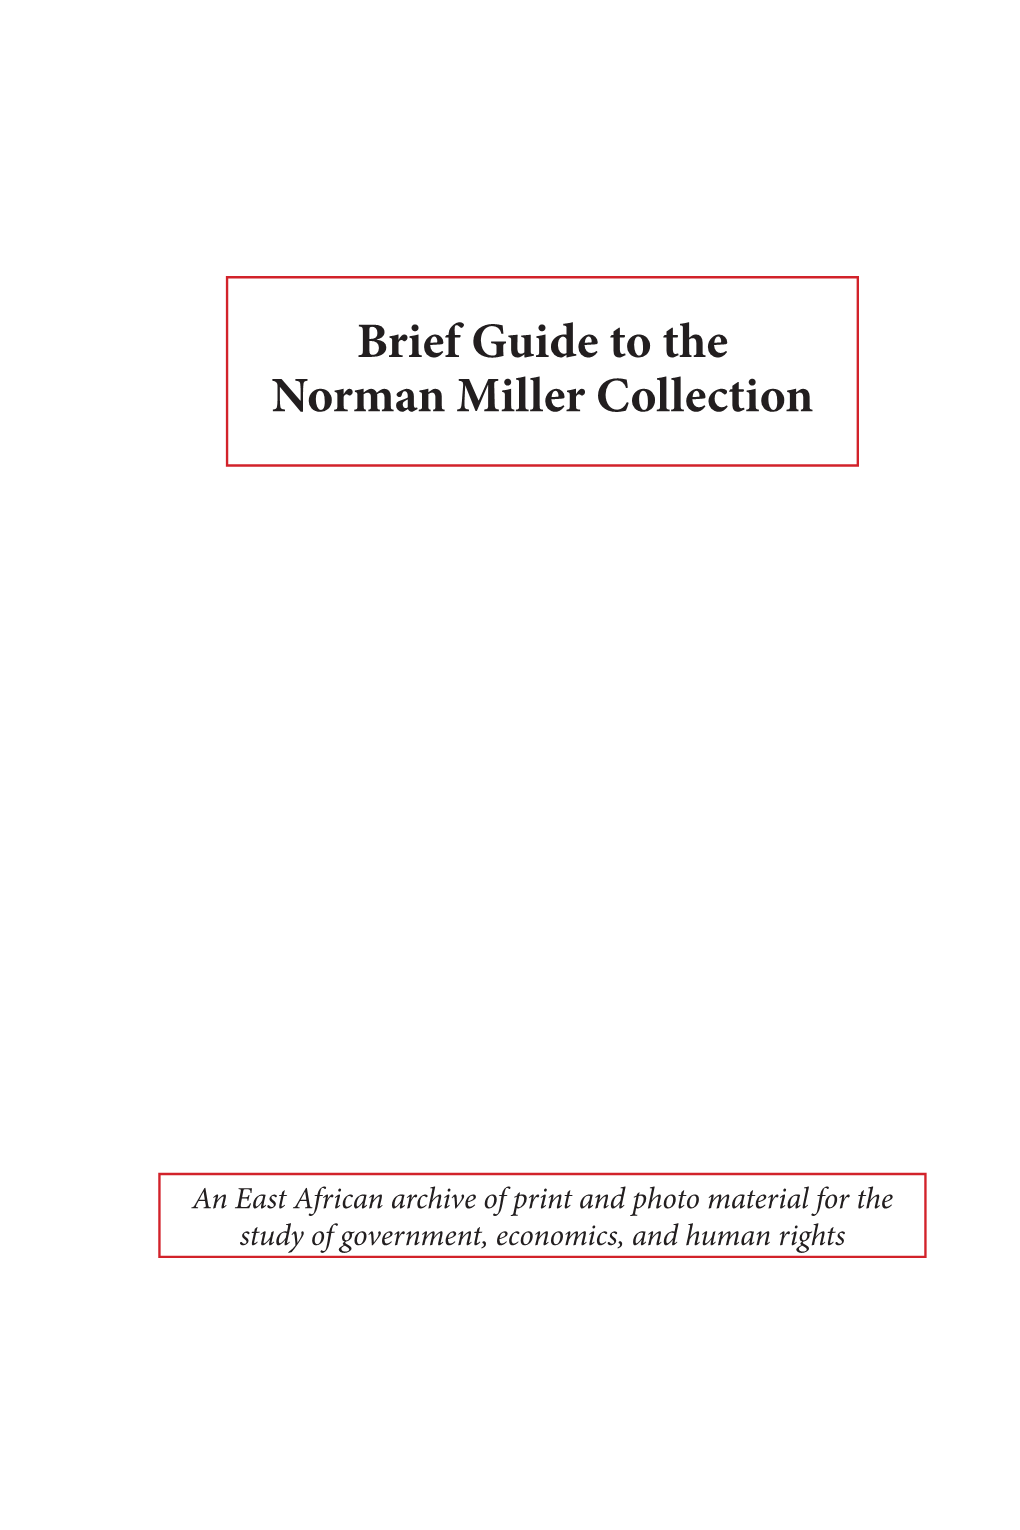 Brief Guide to the Norman Miller Collection